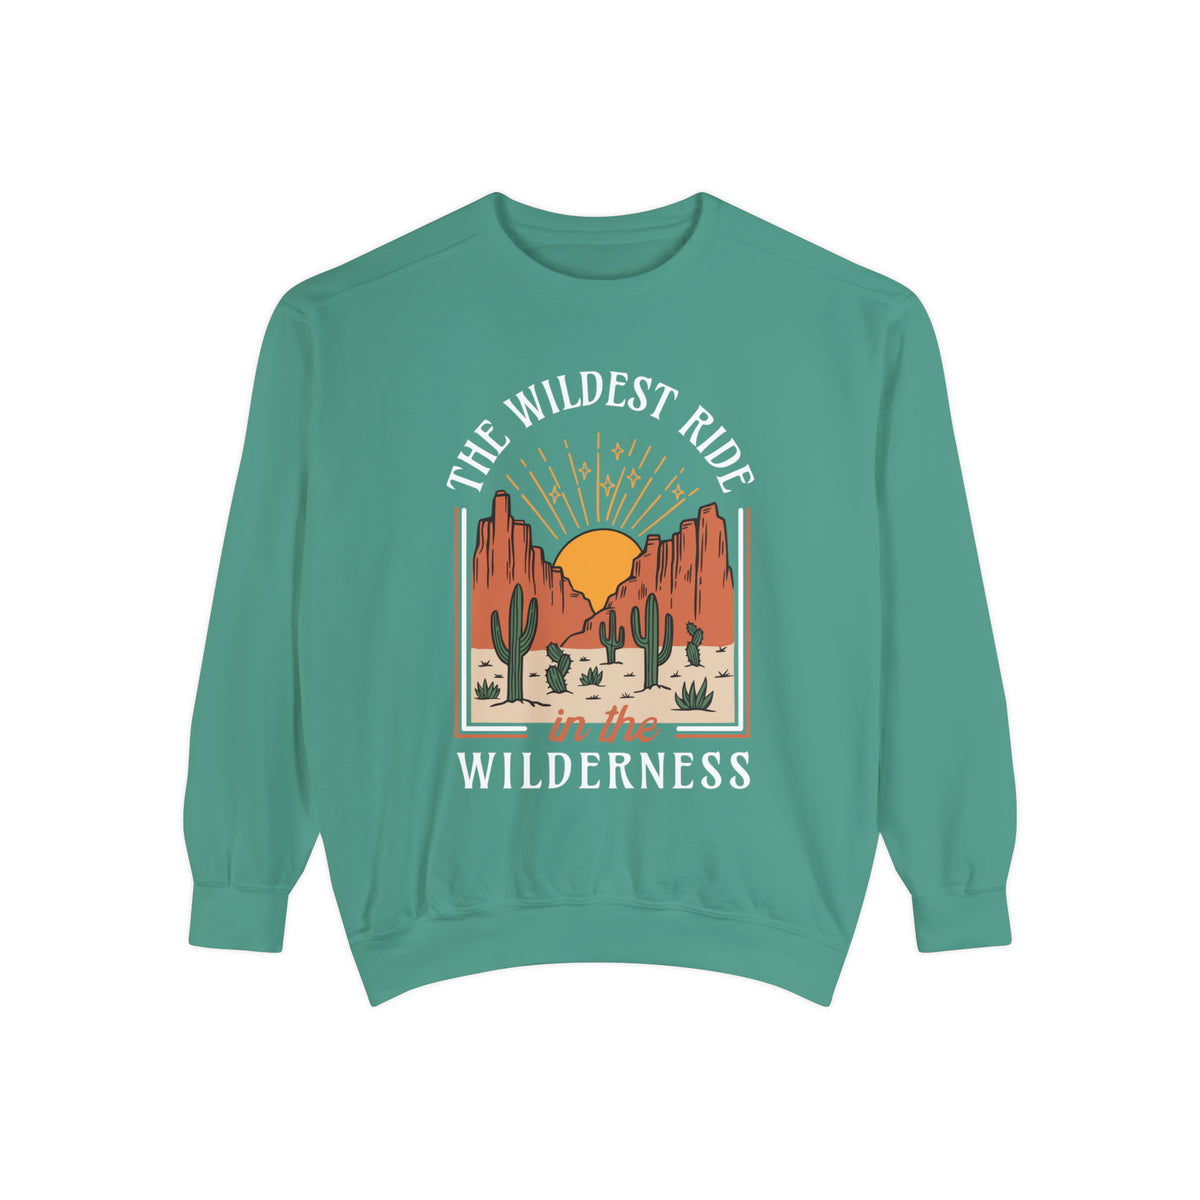 The Wildest Ride In The Wilderness Comfort Colors Unisex Garment-Dyed Sweatshirt